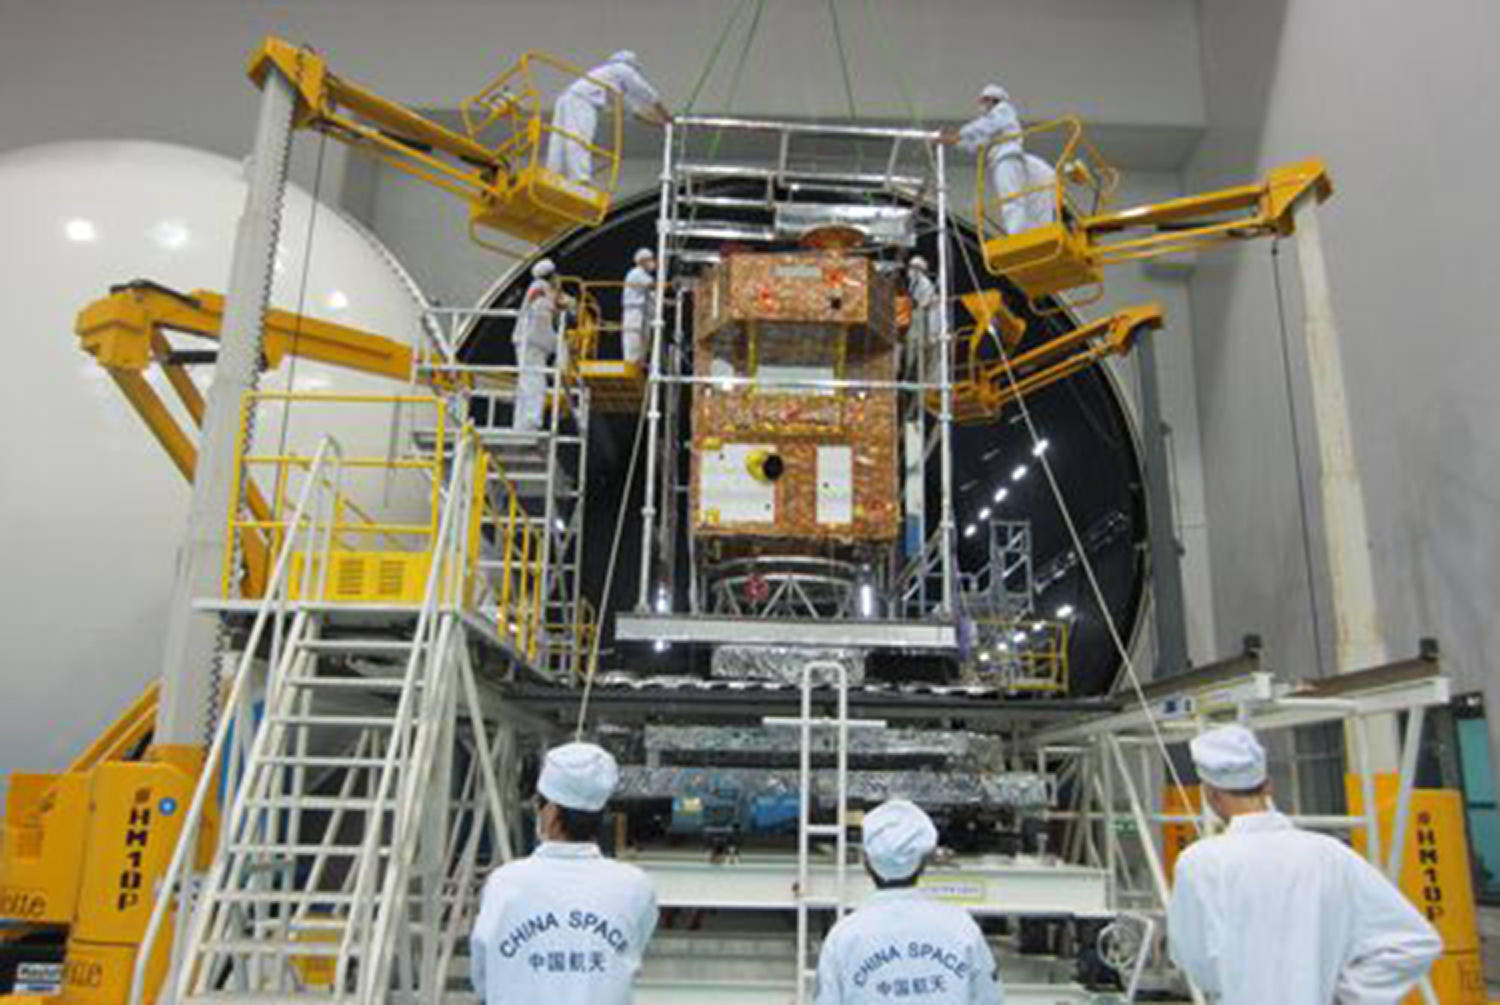 Scientists conduct tests on the satellite last year. Photo: SCMP